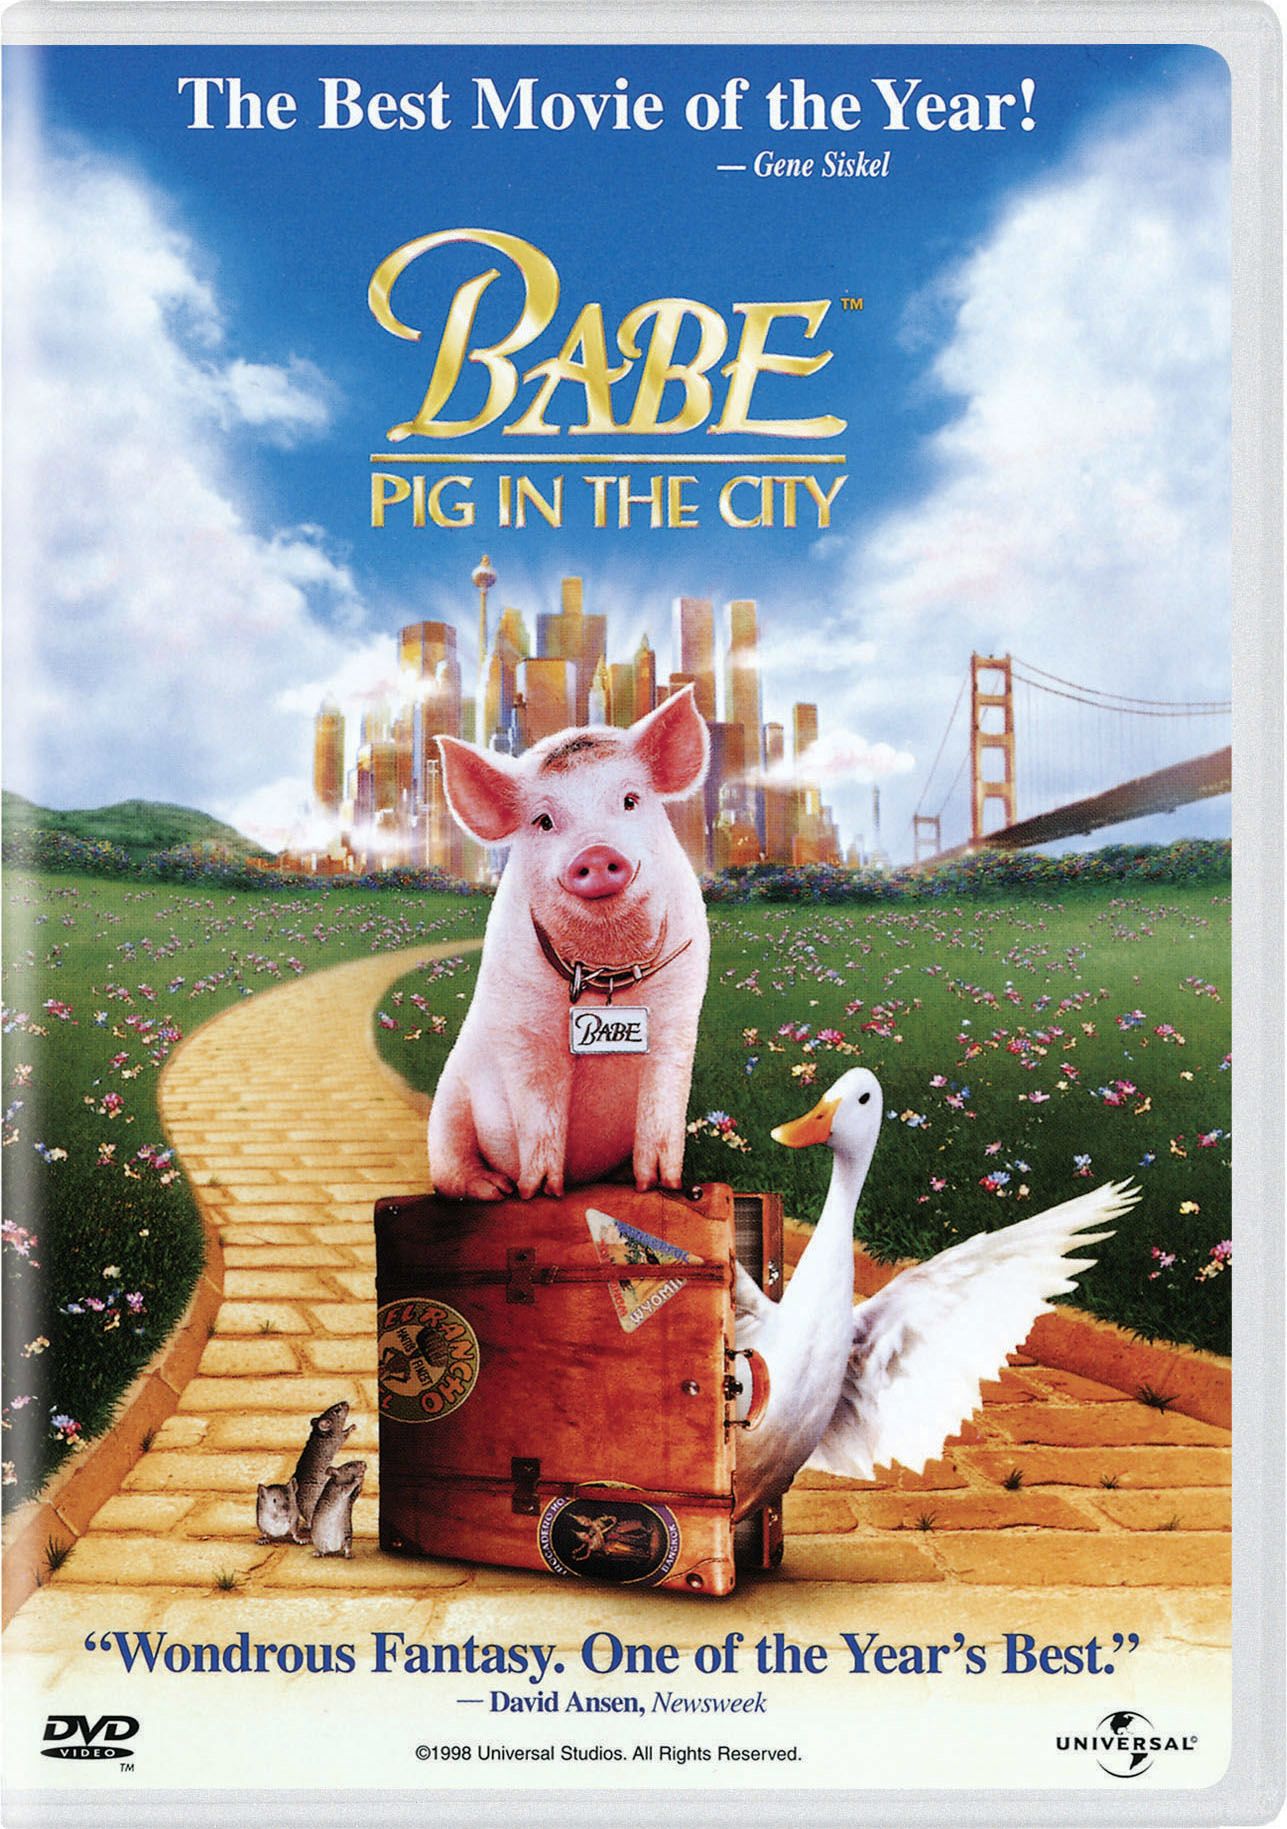 Babe: Pig In The City - DVD [ 1998 ]  - Comedy Movies On DVD - Movies On GRUV